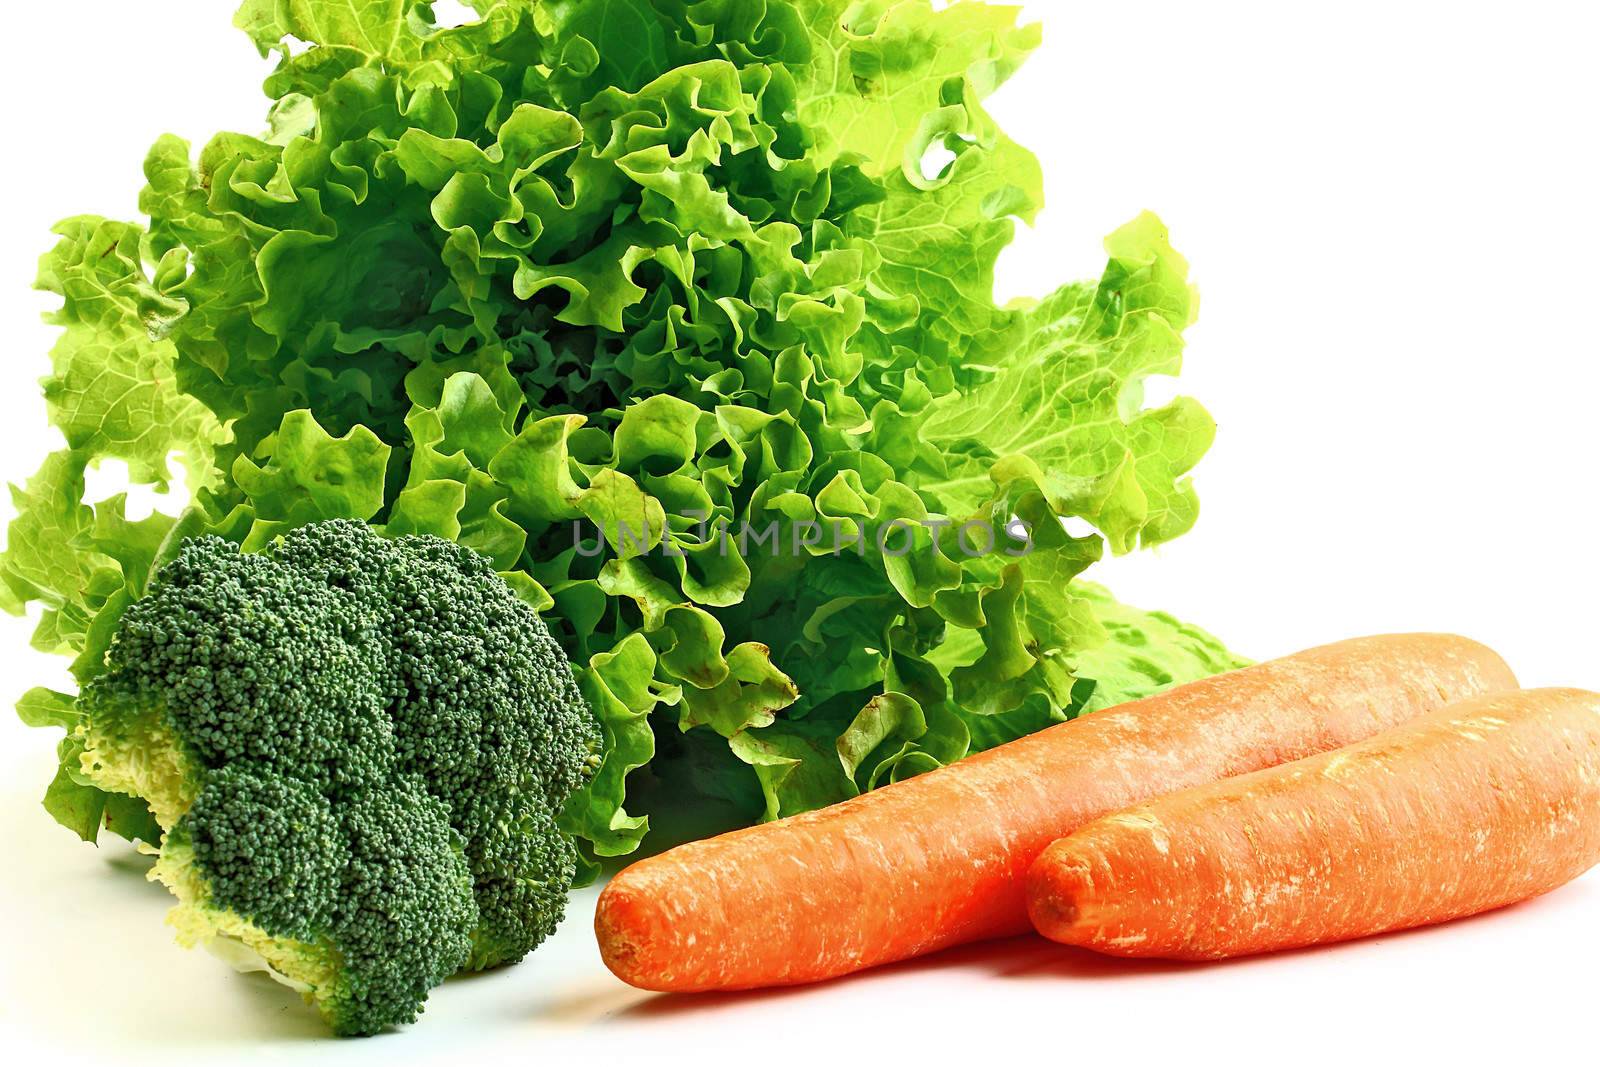 Lettuce carrots and broccoli on white